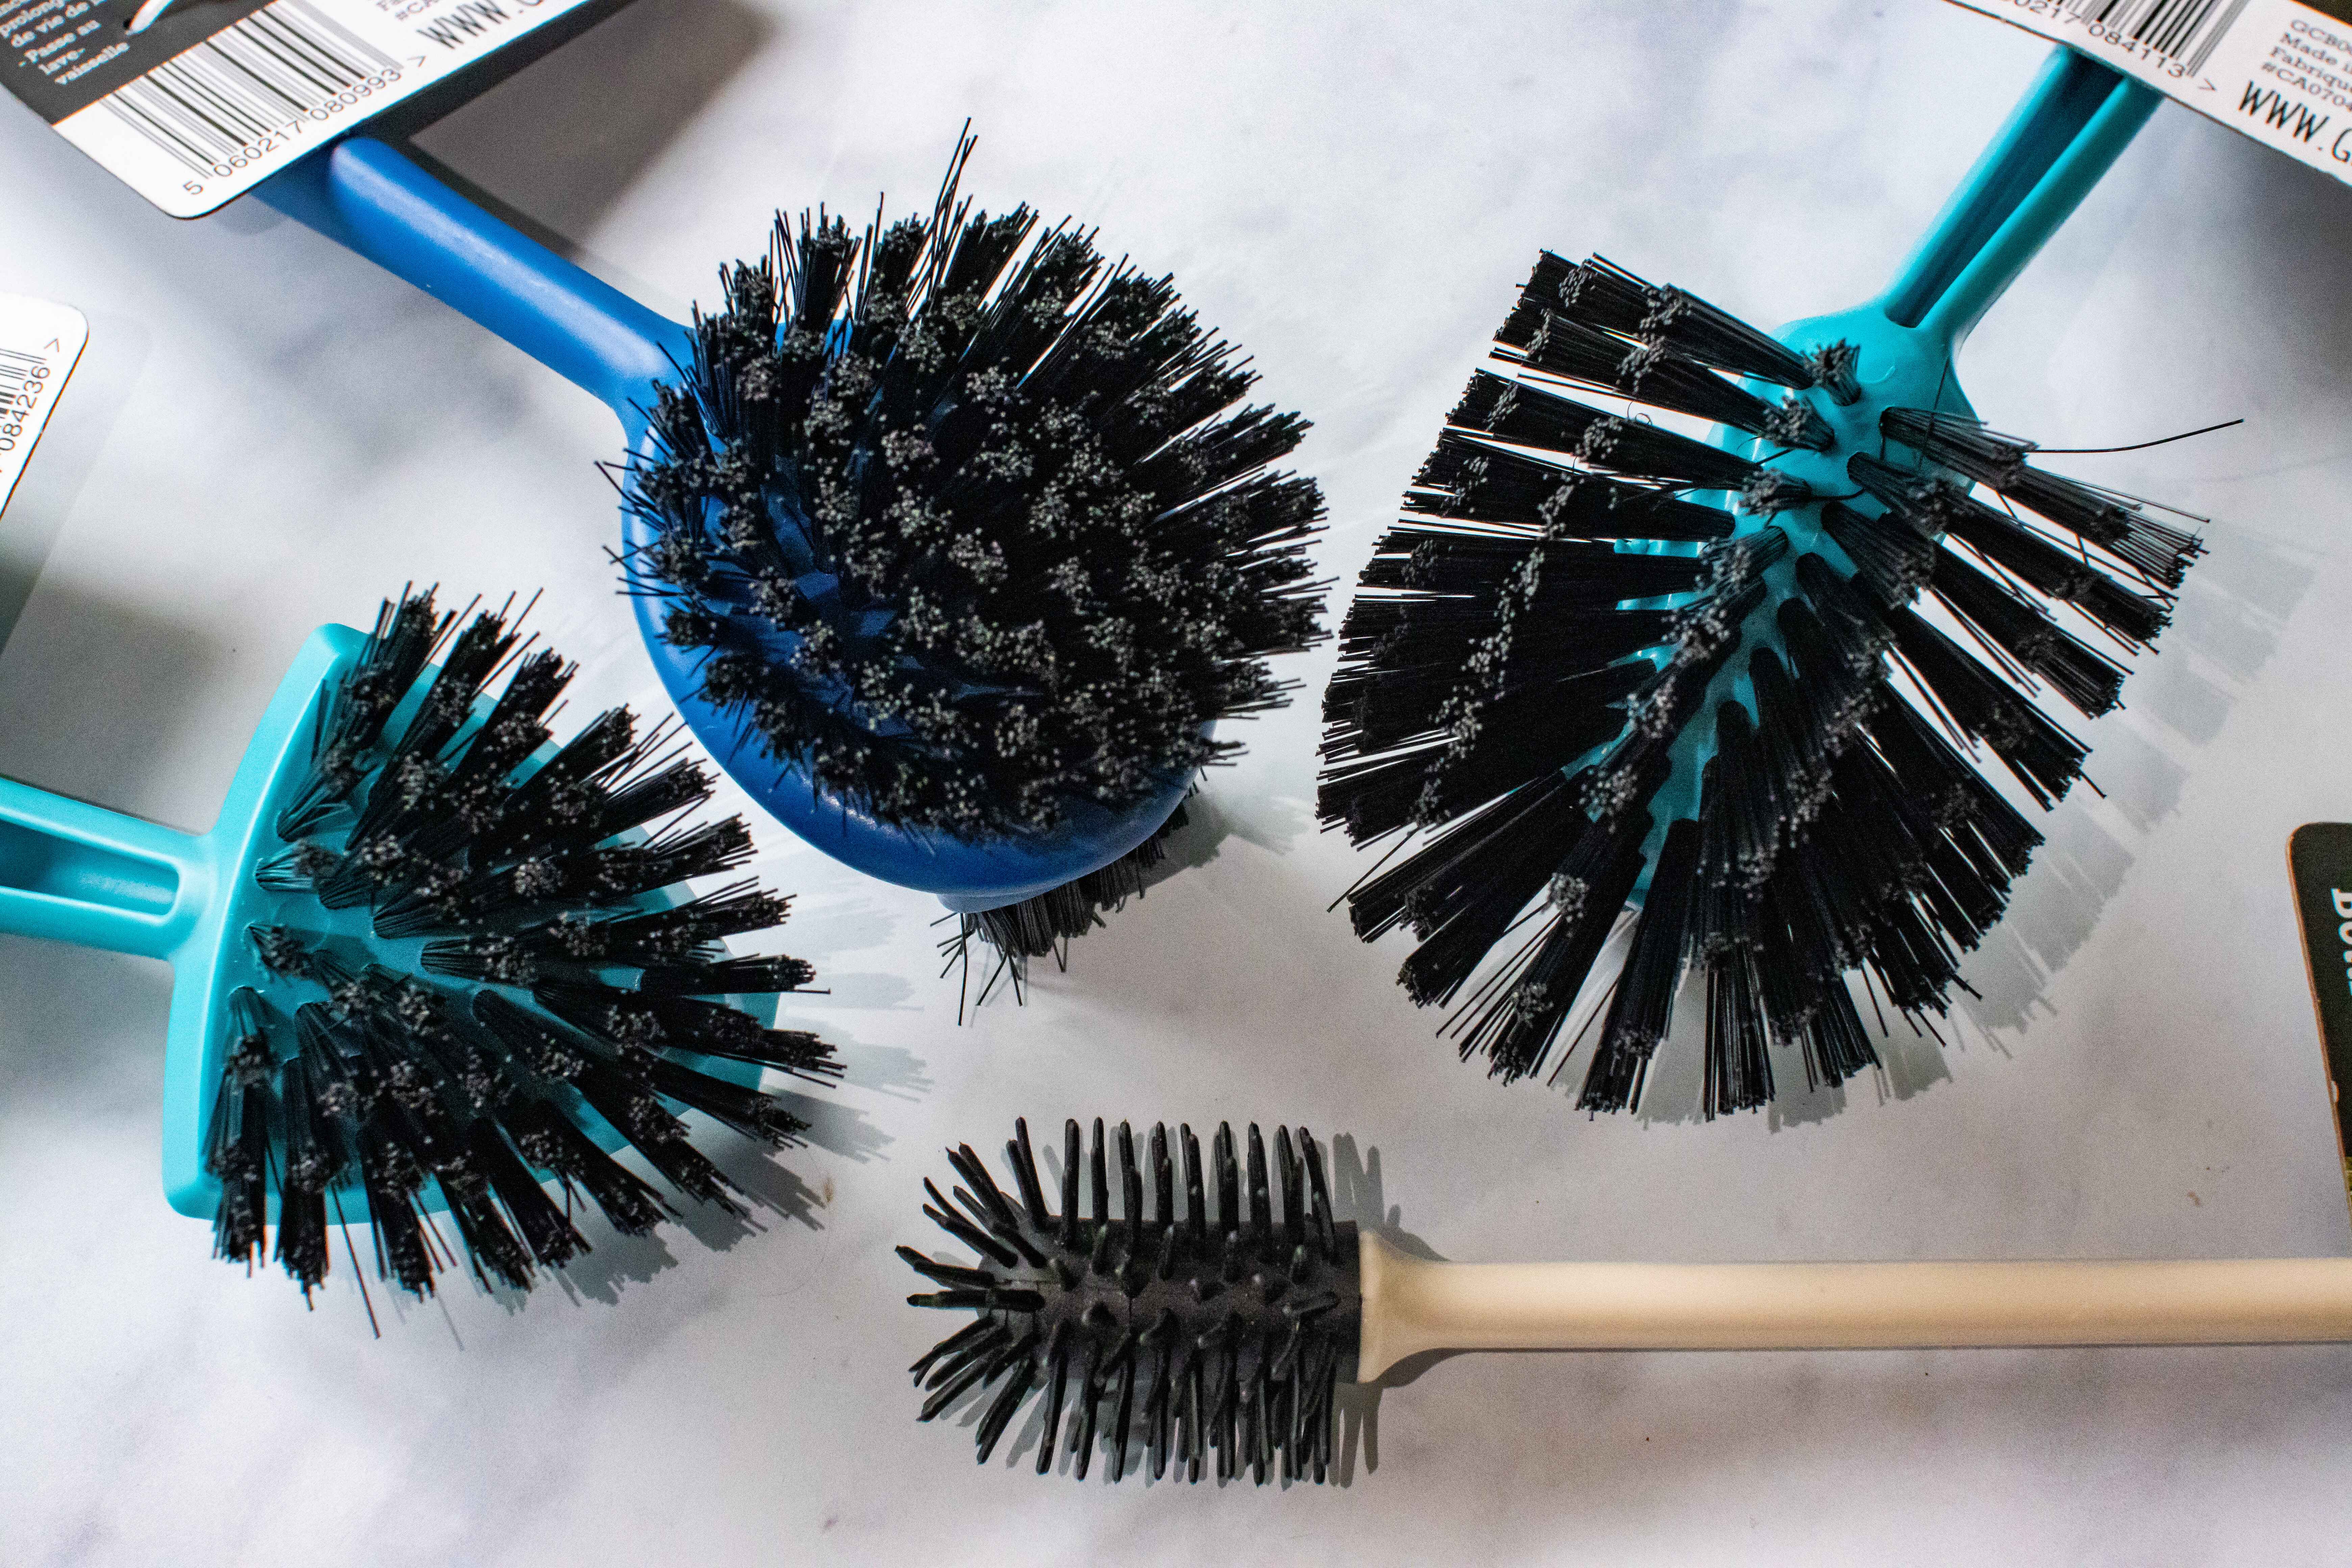  Grout Brush, Cleaning Brushes, Small Cleaning Brush Set, Small  Brushes for Cleaning, Small Scrub Brush, and Crevice Cleaning Brush is  Applicable to Various Narrow Spaces. Such as Bottle Caps and Stove 